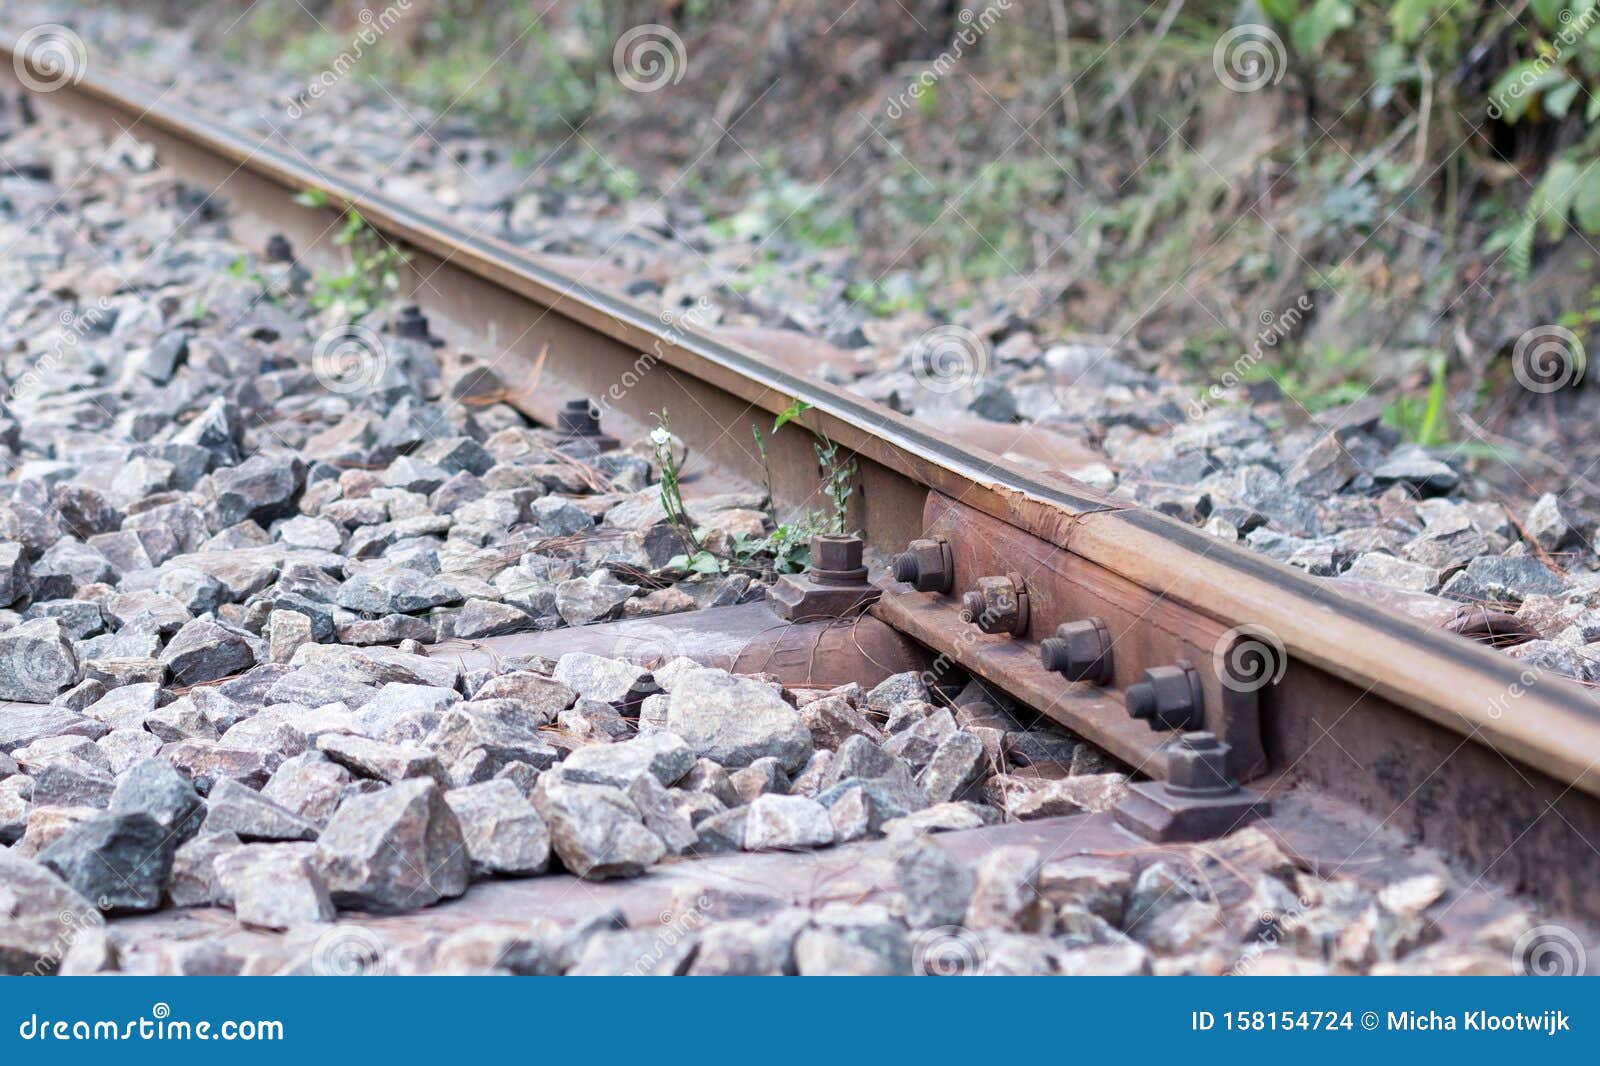 railroad tracks for train in intersting perspective